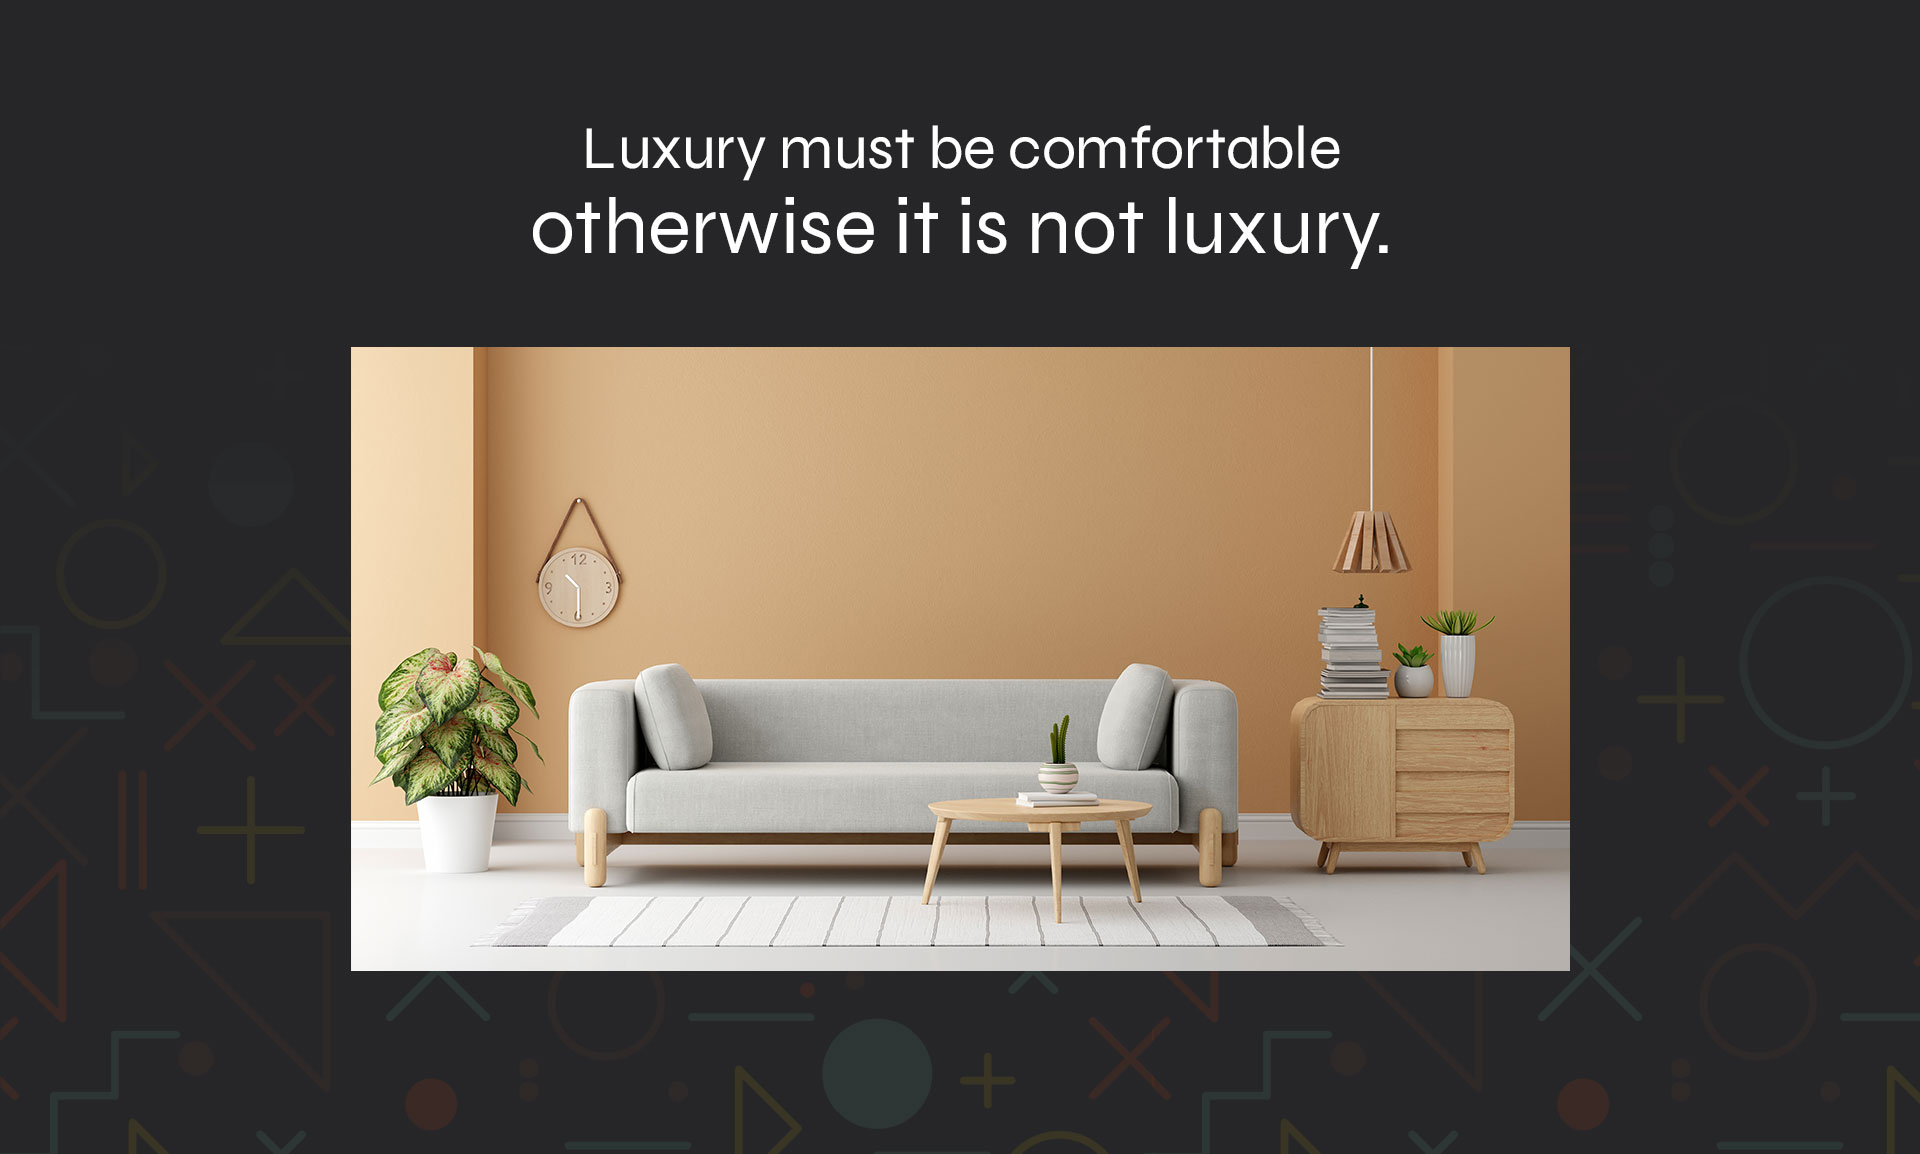 Luxury must be comfortable otherwise it is not luxury.